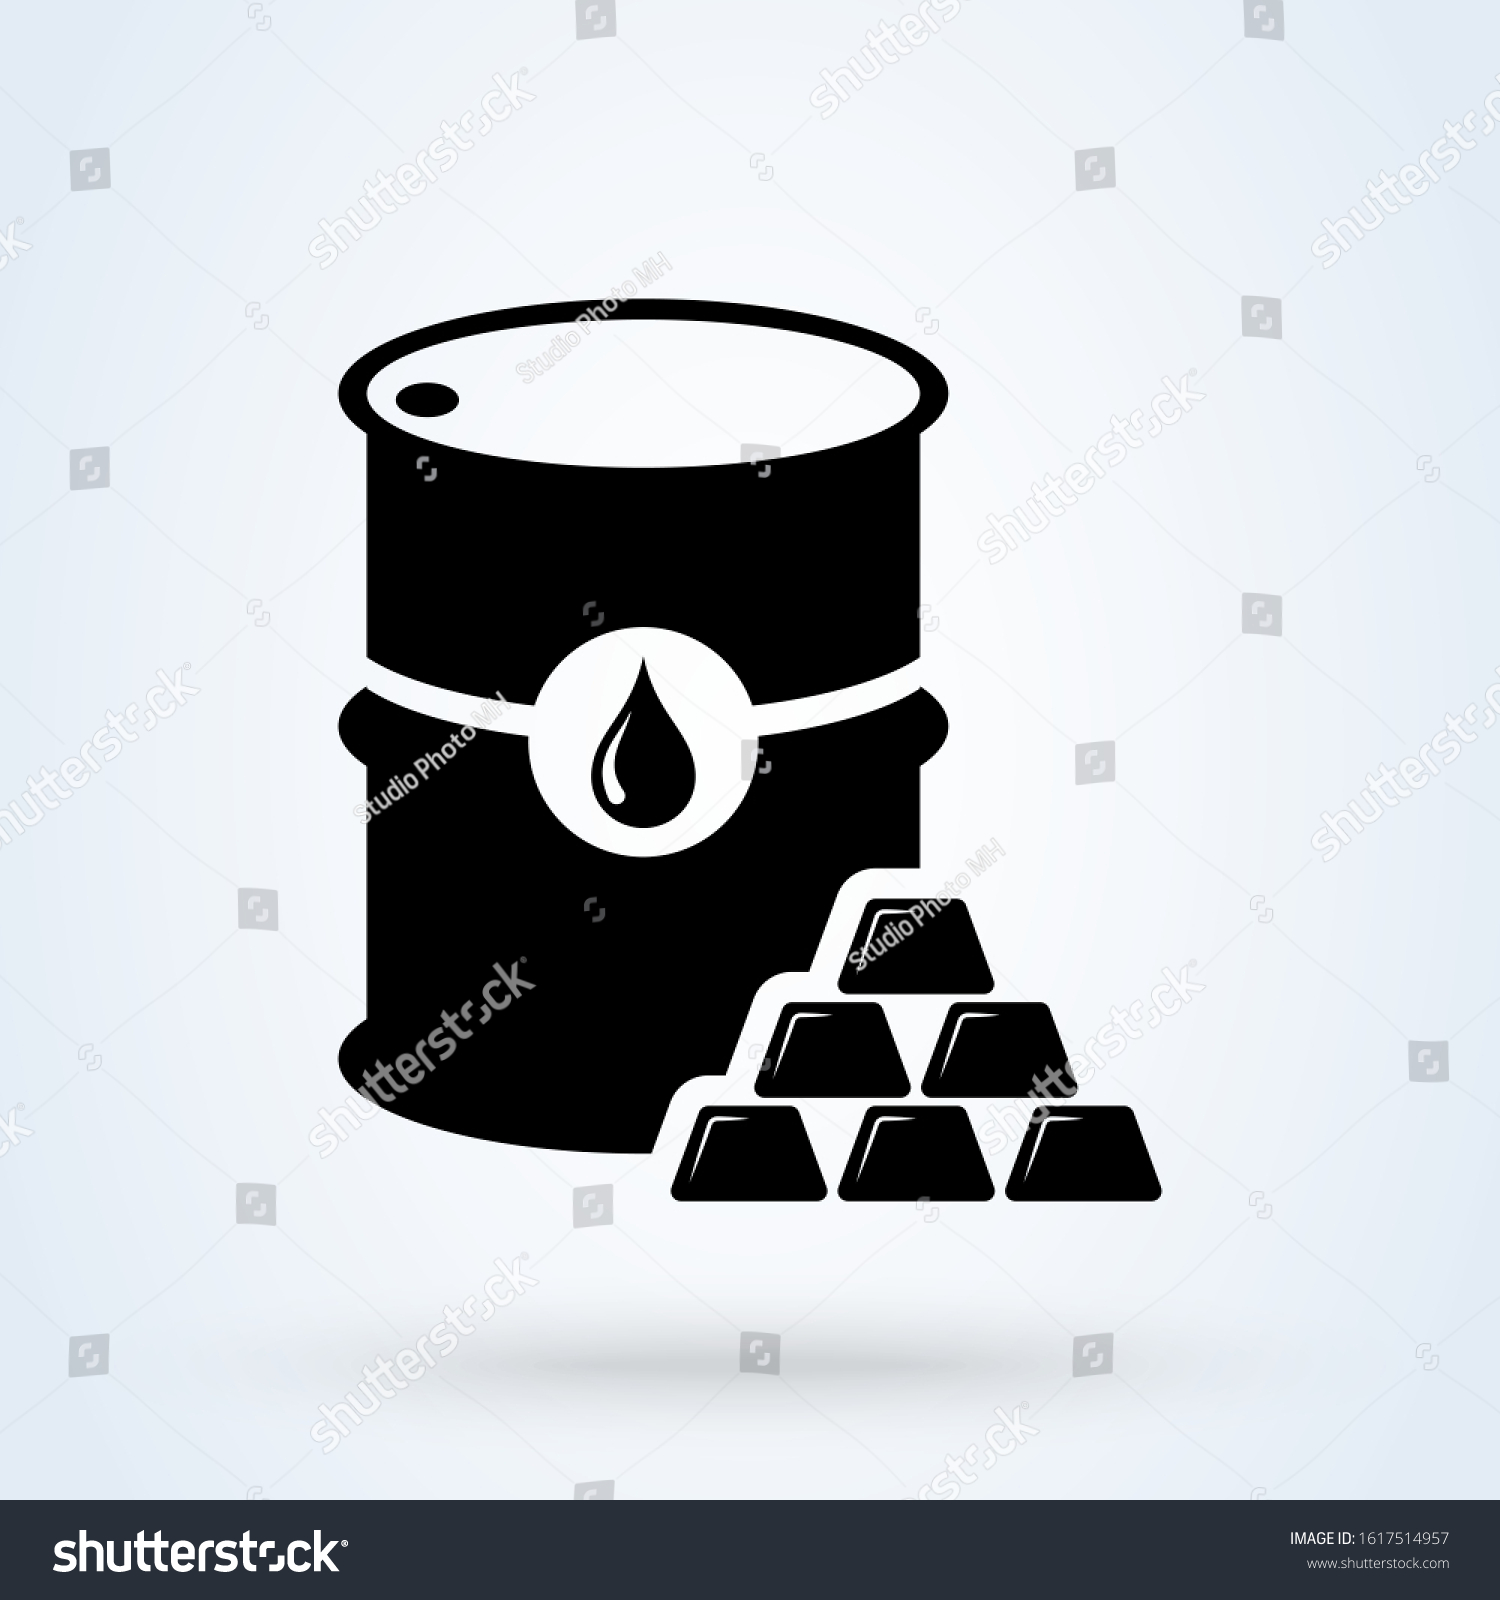 3,932 Commodity logo Images, Stock Photos & Vectors | Shutterstock